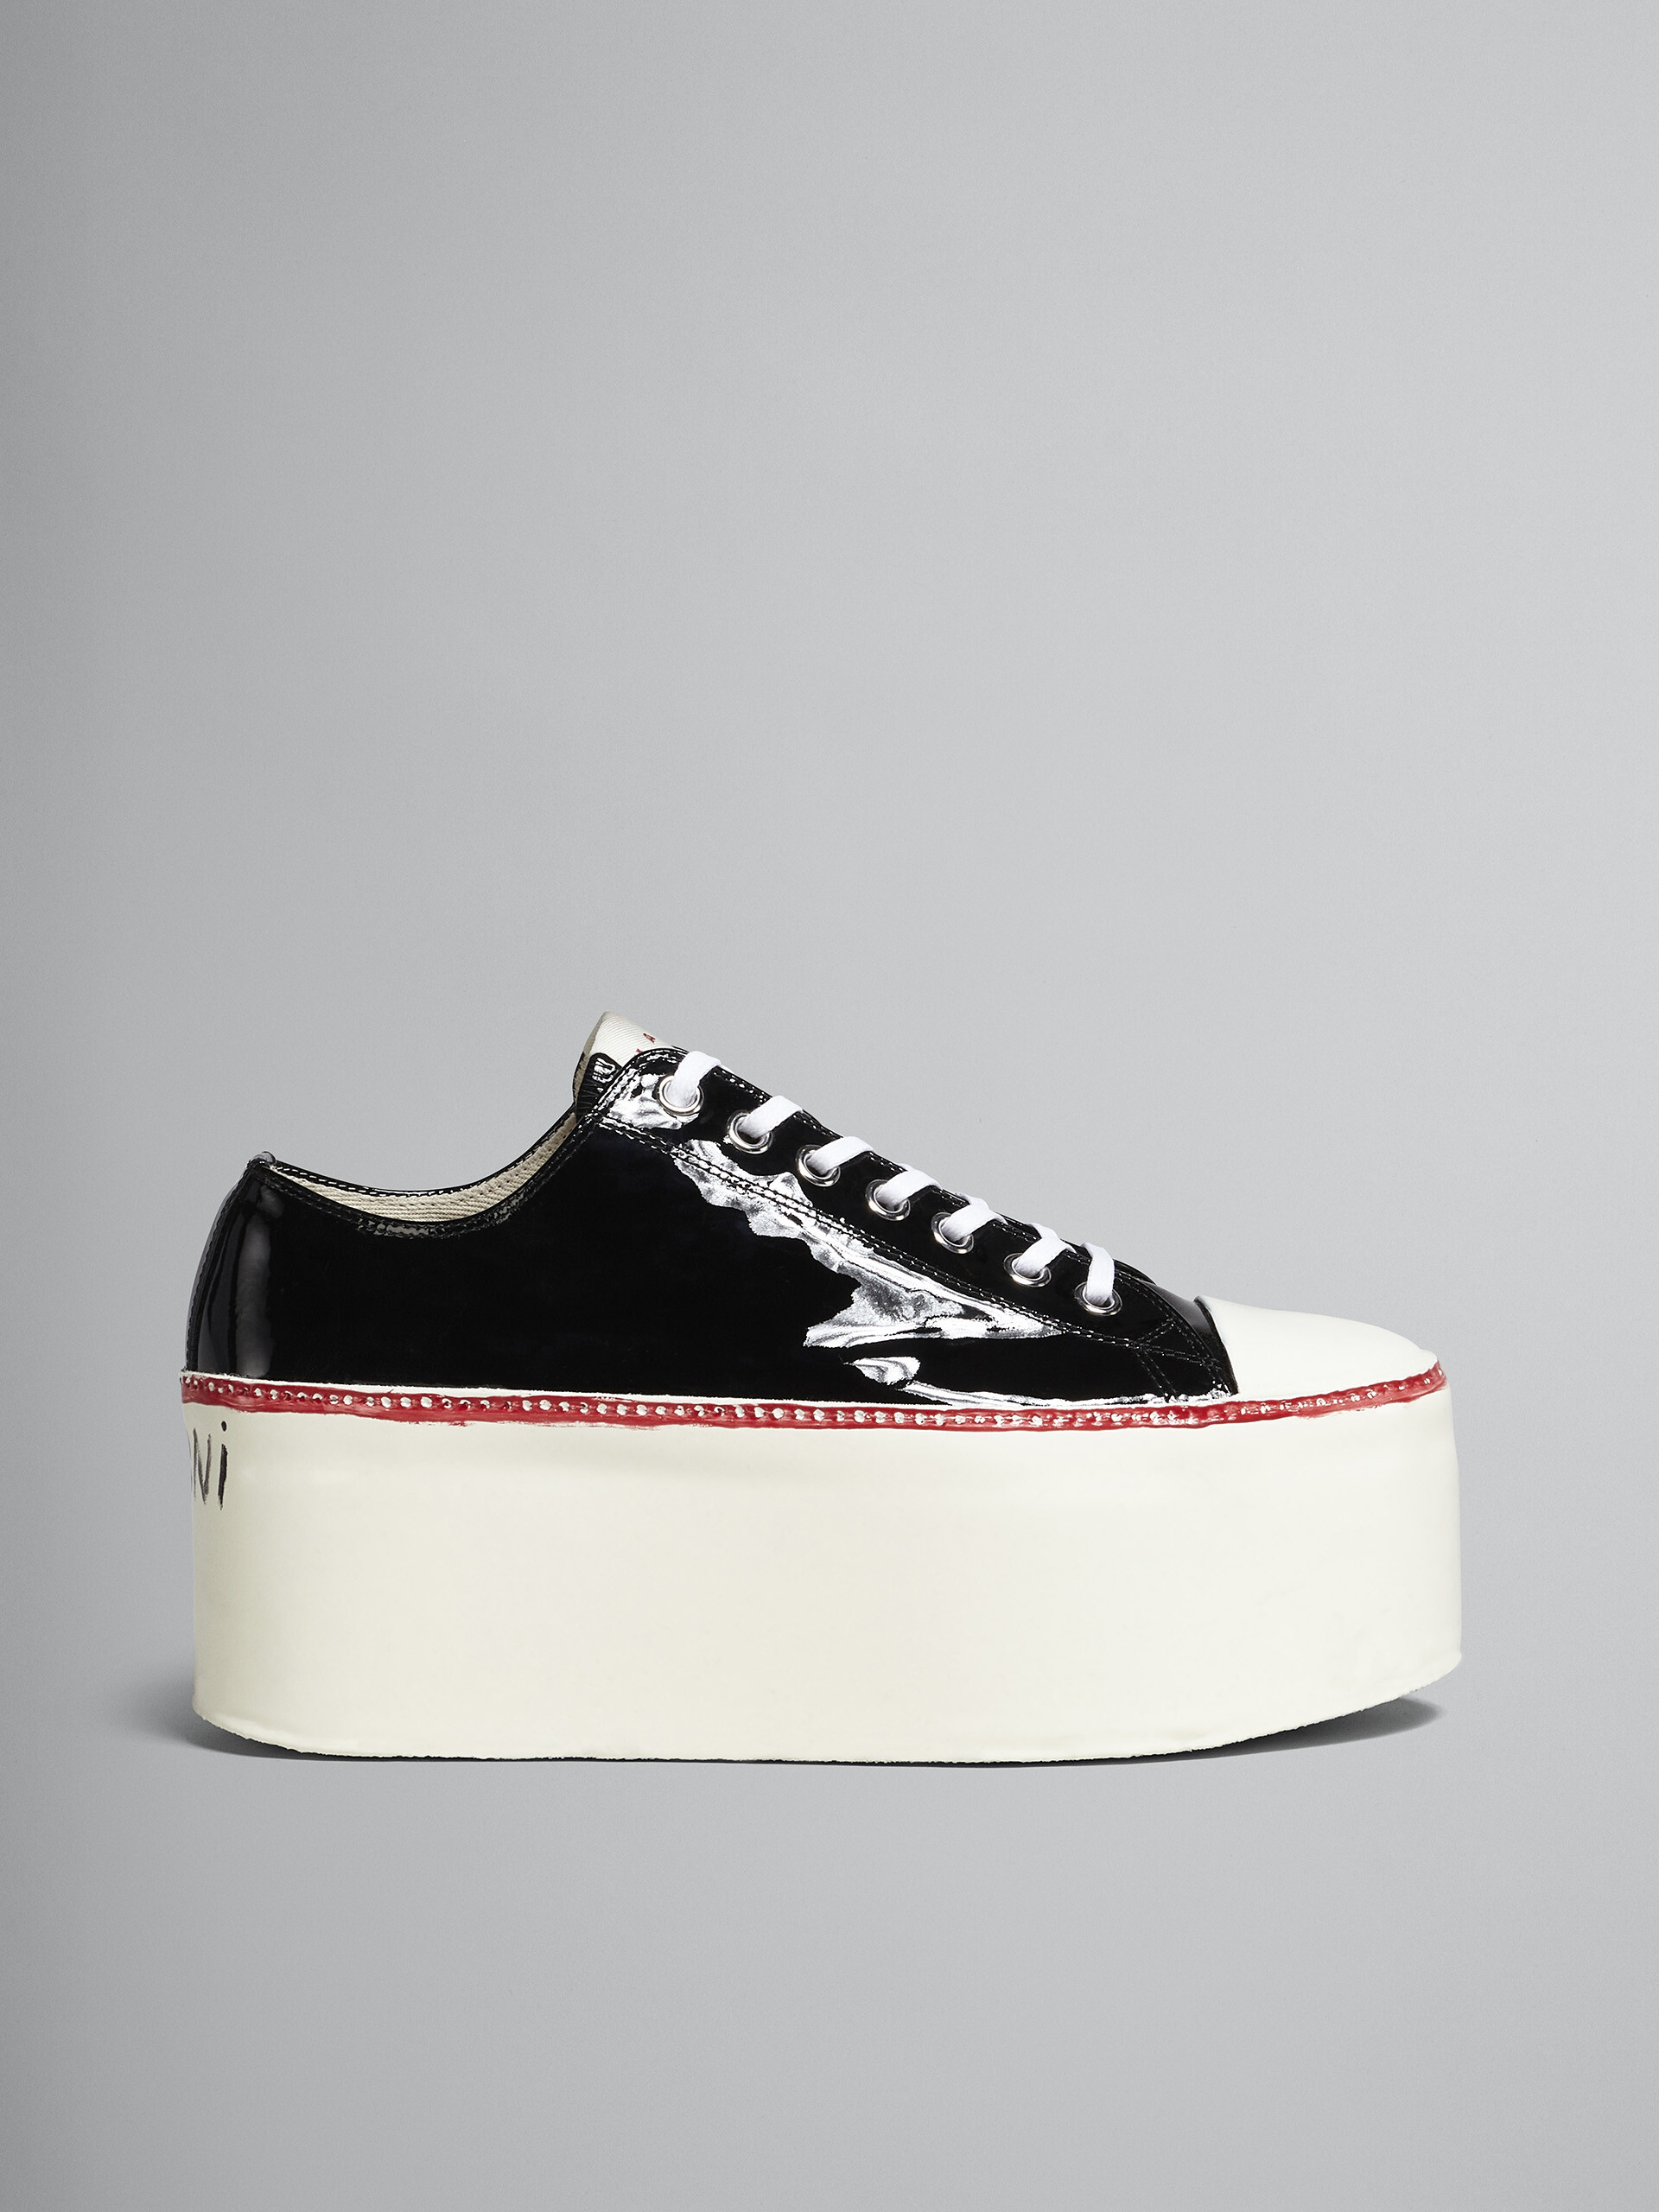 Patent leather platform sneaker - Sneakers - Image 1